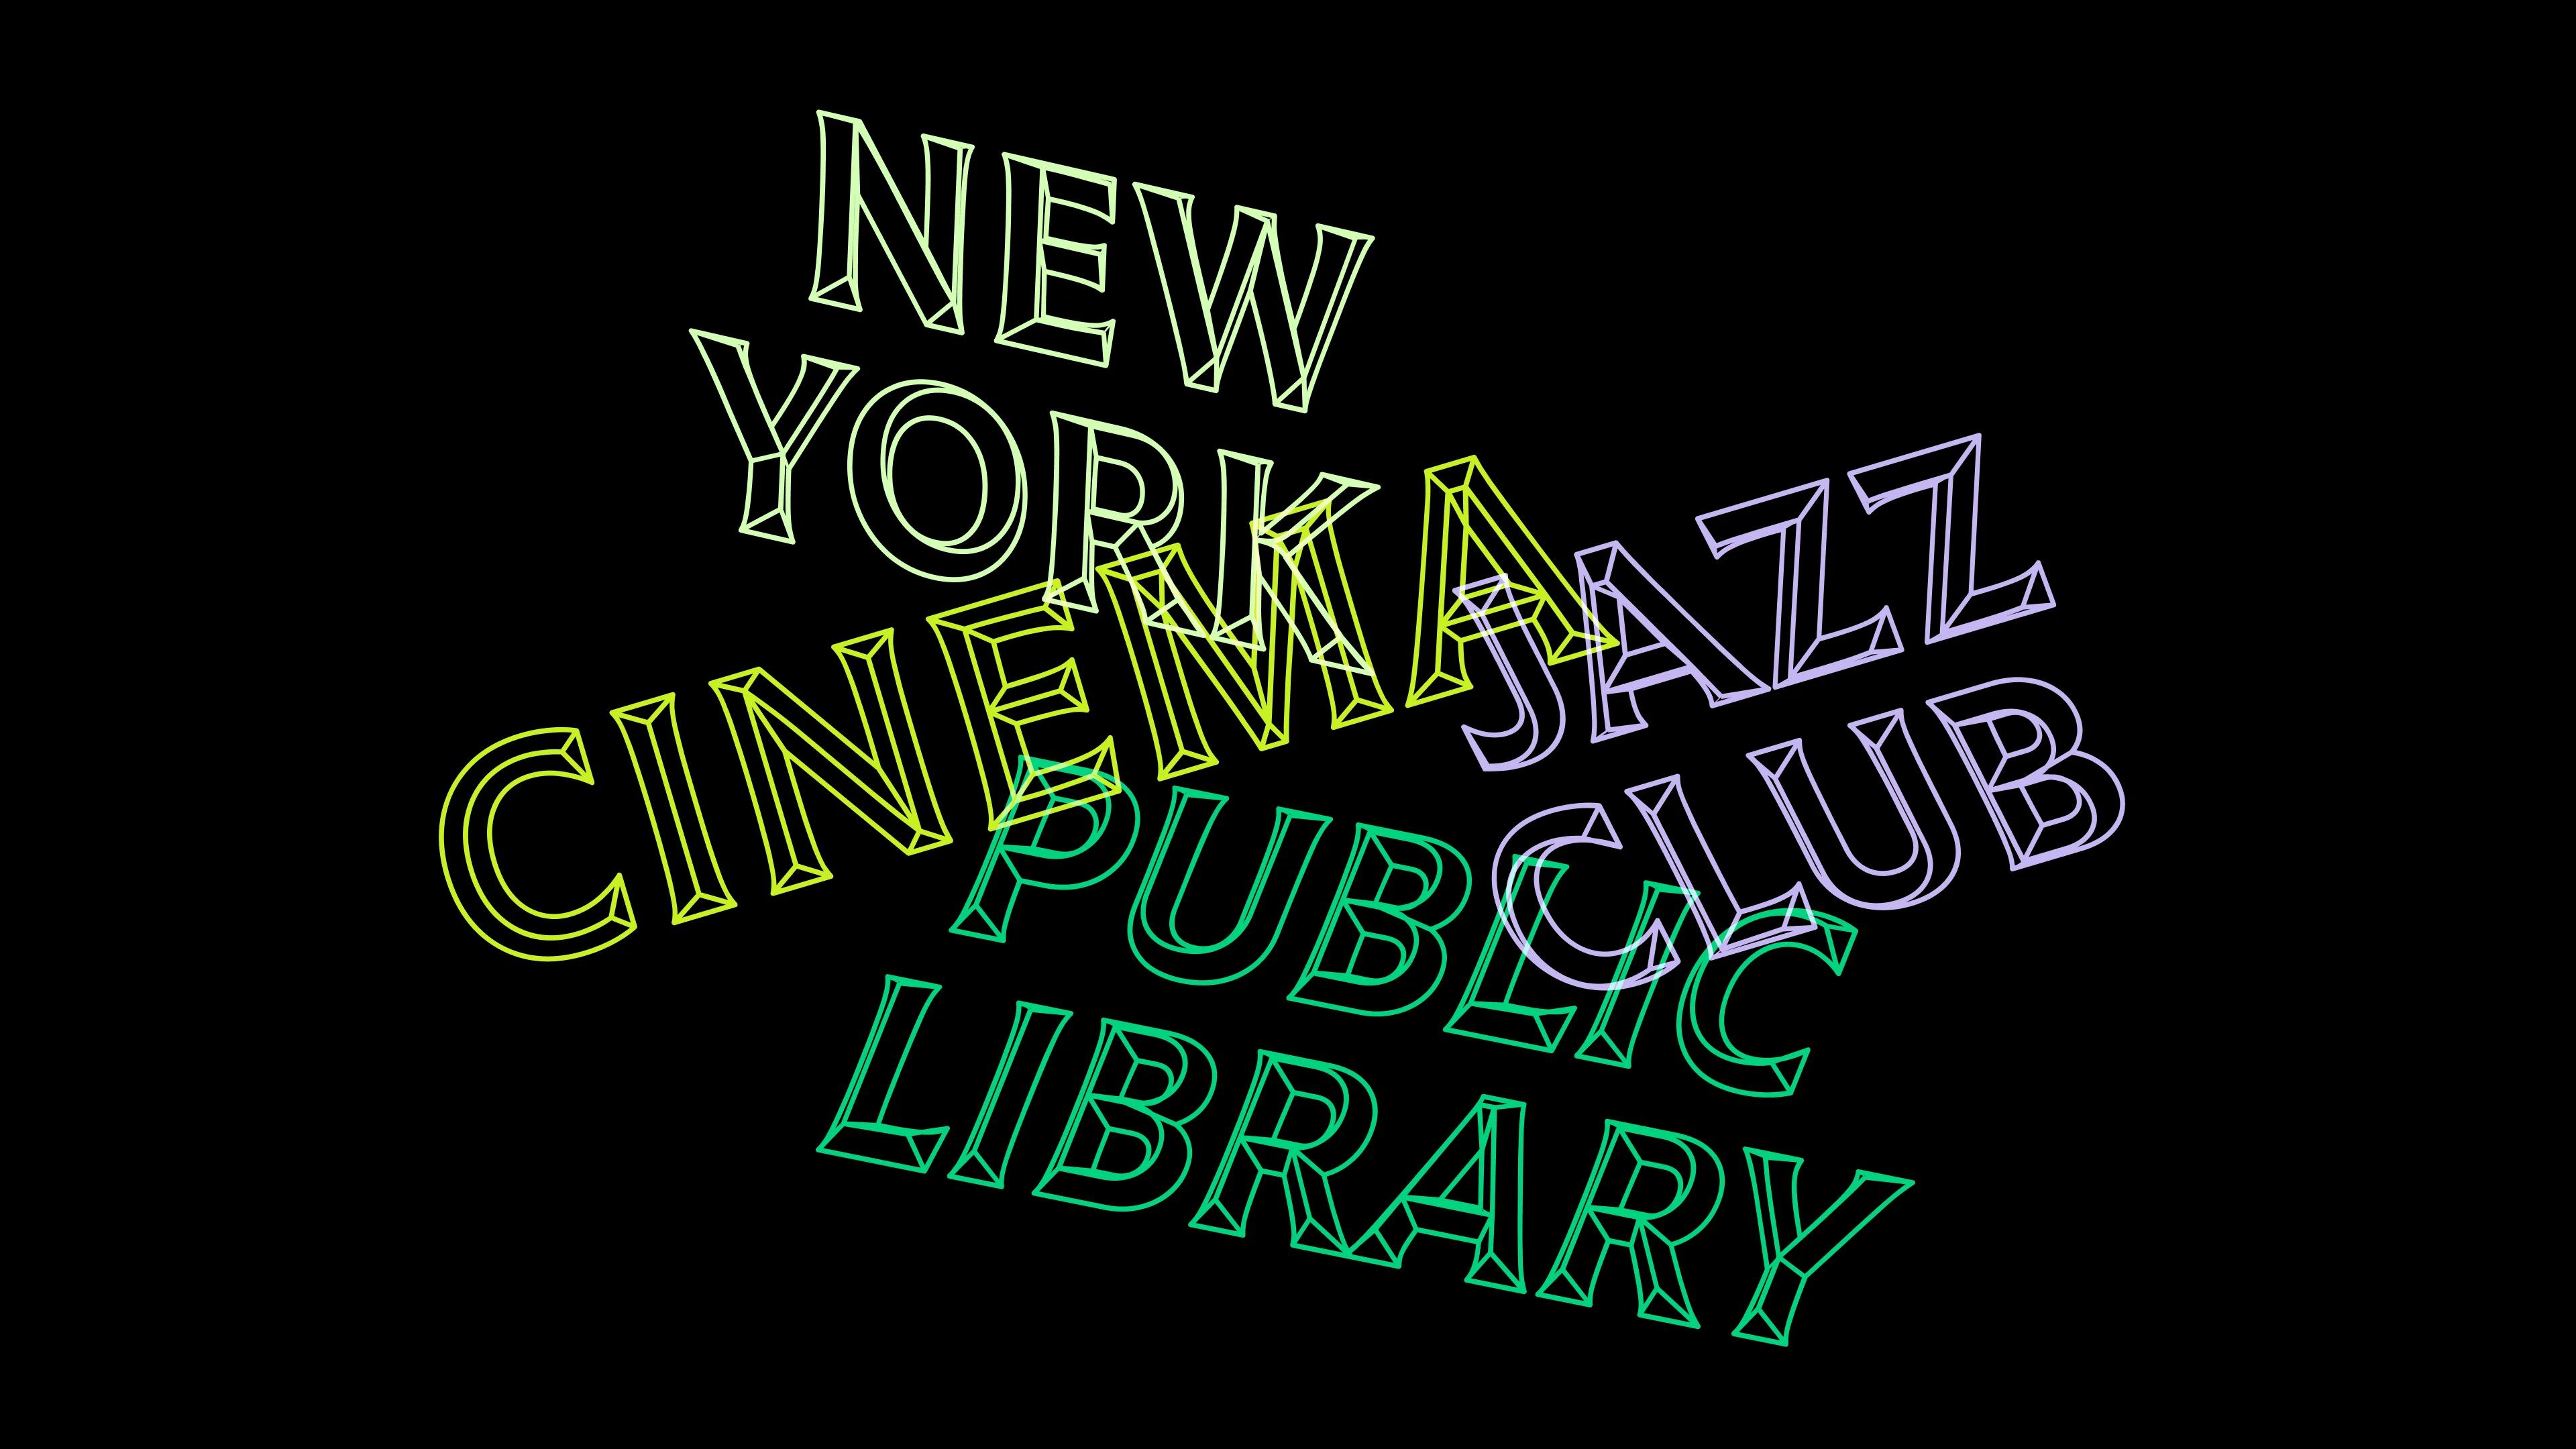 The words New York, Cinema, Public Library, and Jazz Club with Tilt Prism font in bright neon colors on black background